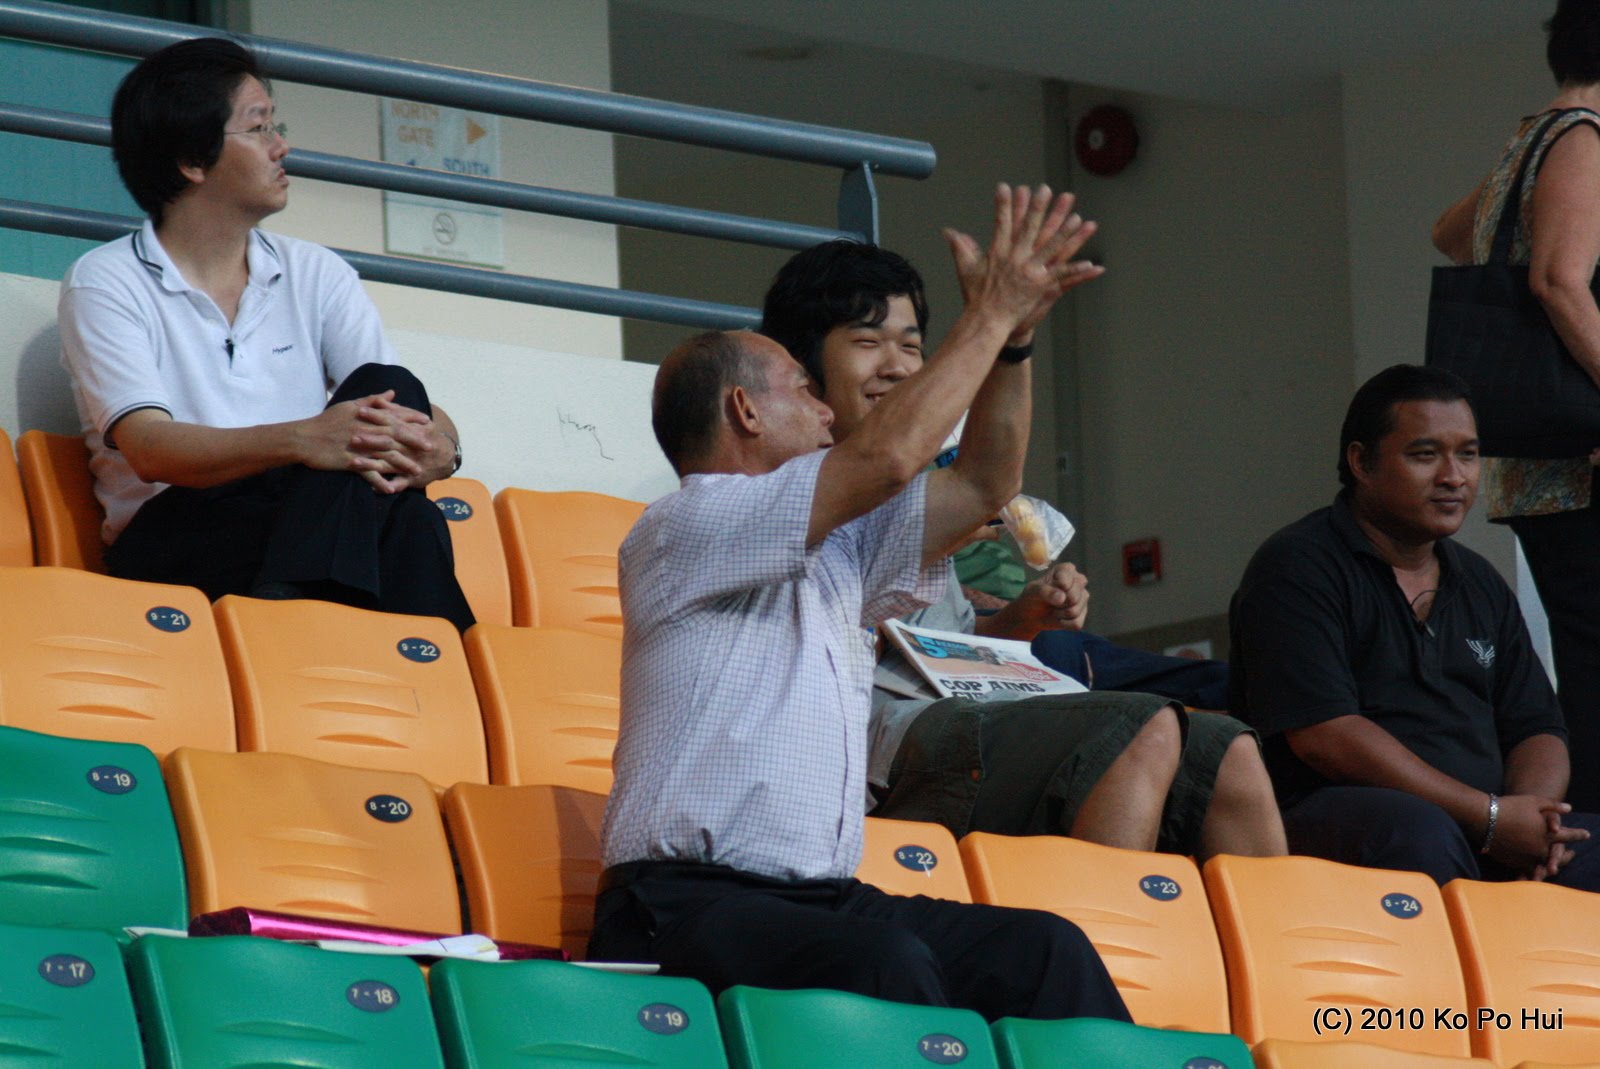 BoLASEPaKO.com - a simple view on Singapore Soccer: Trying out on ...